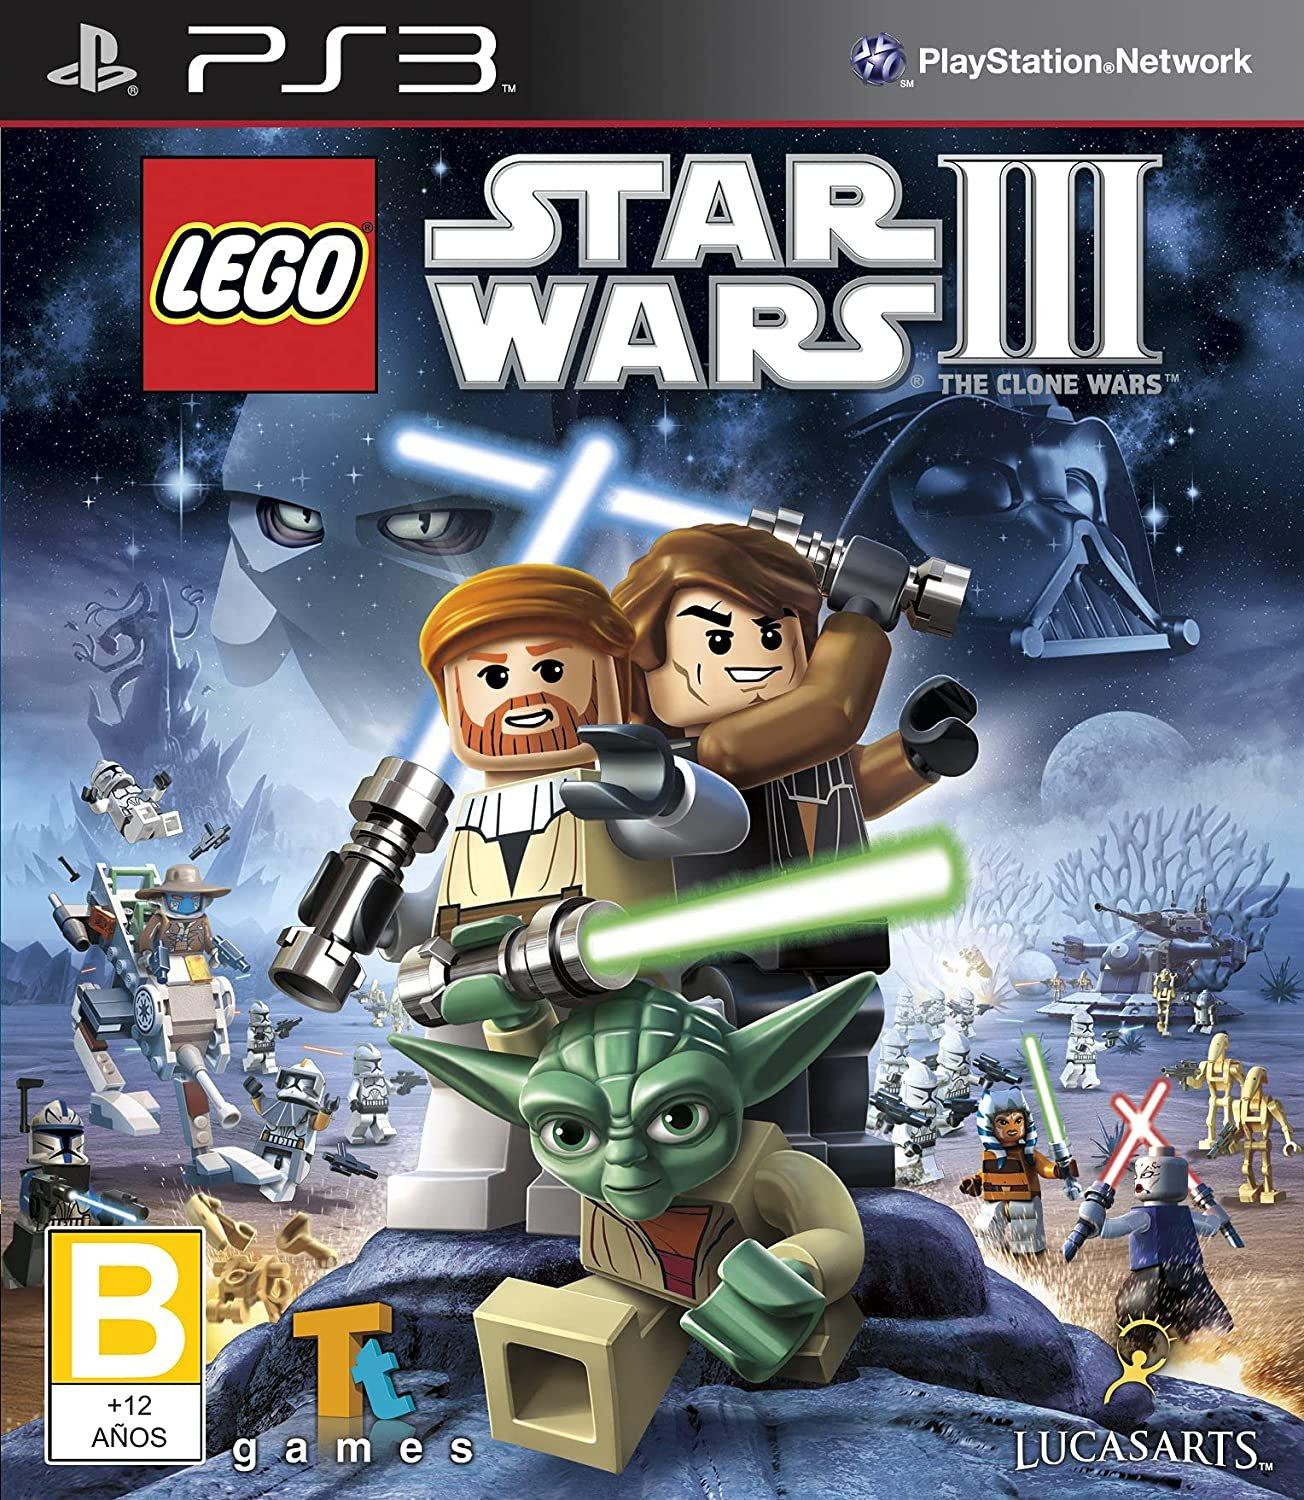 Lego Star Wars The Force Awakens Playstation 3 PS3 Game For Sale